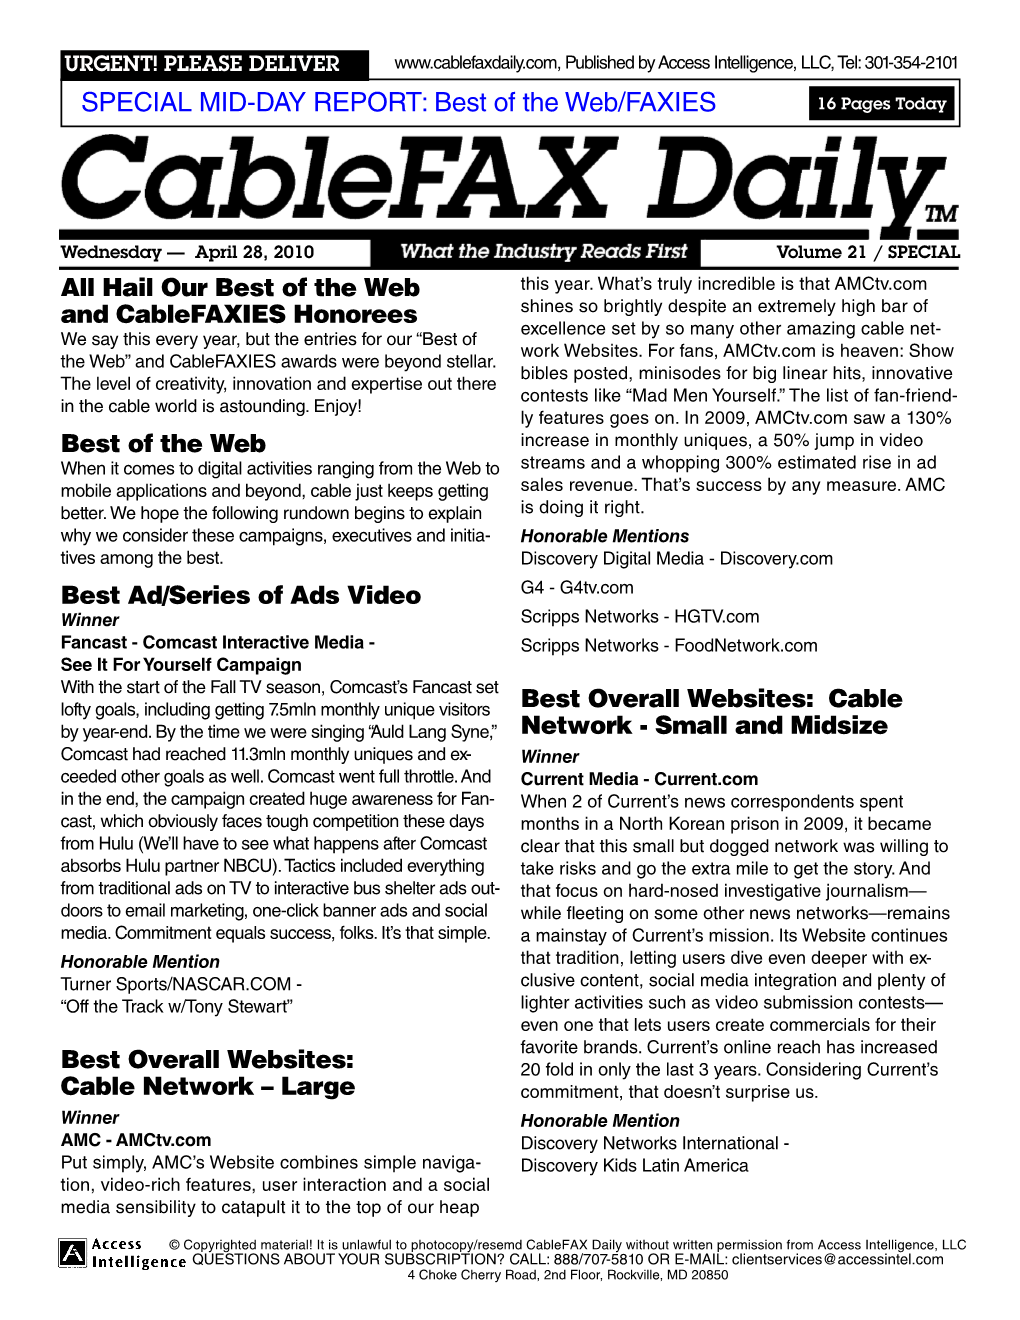 SPECIAL MID-DAY REPORT: Best of the Web/FAXIES 16 Pages Today